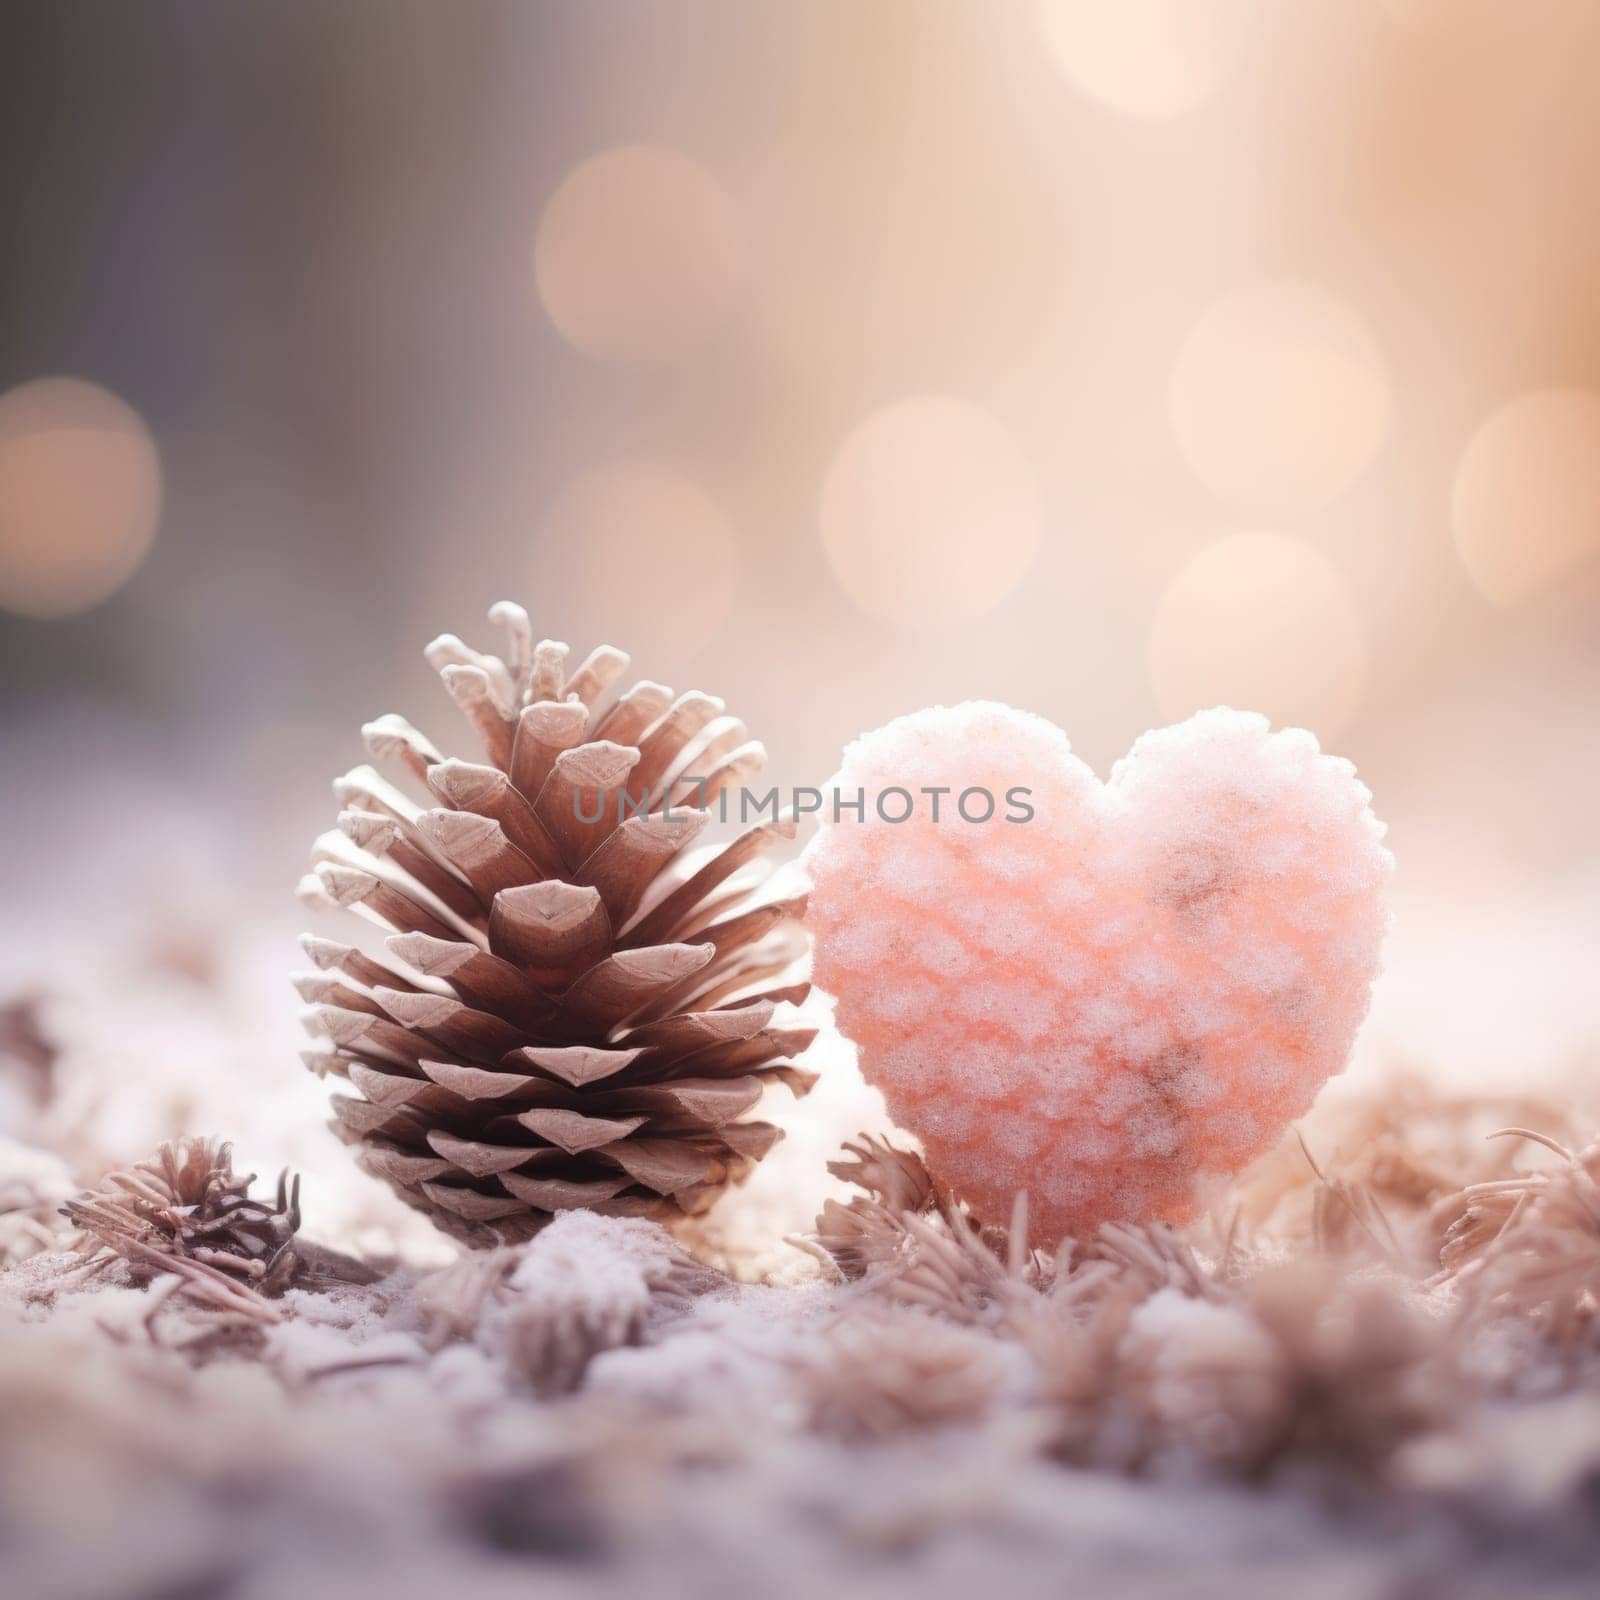 Heart shaped pine cones and heart shaped pine cones on a snowy background, AI by starush